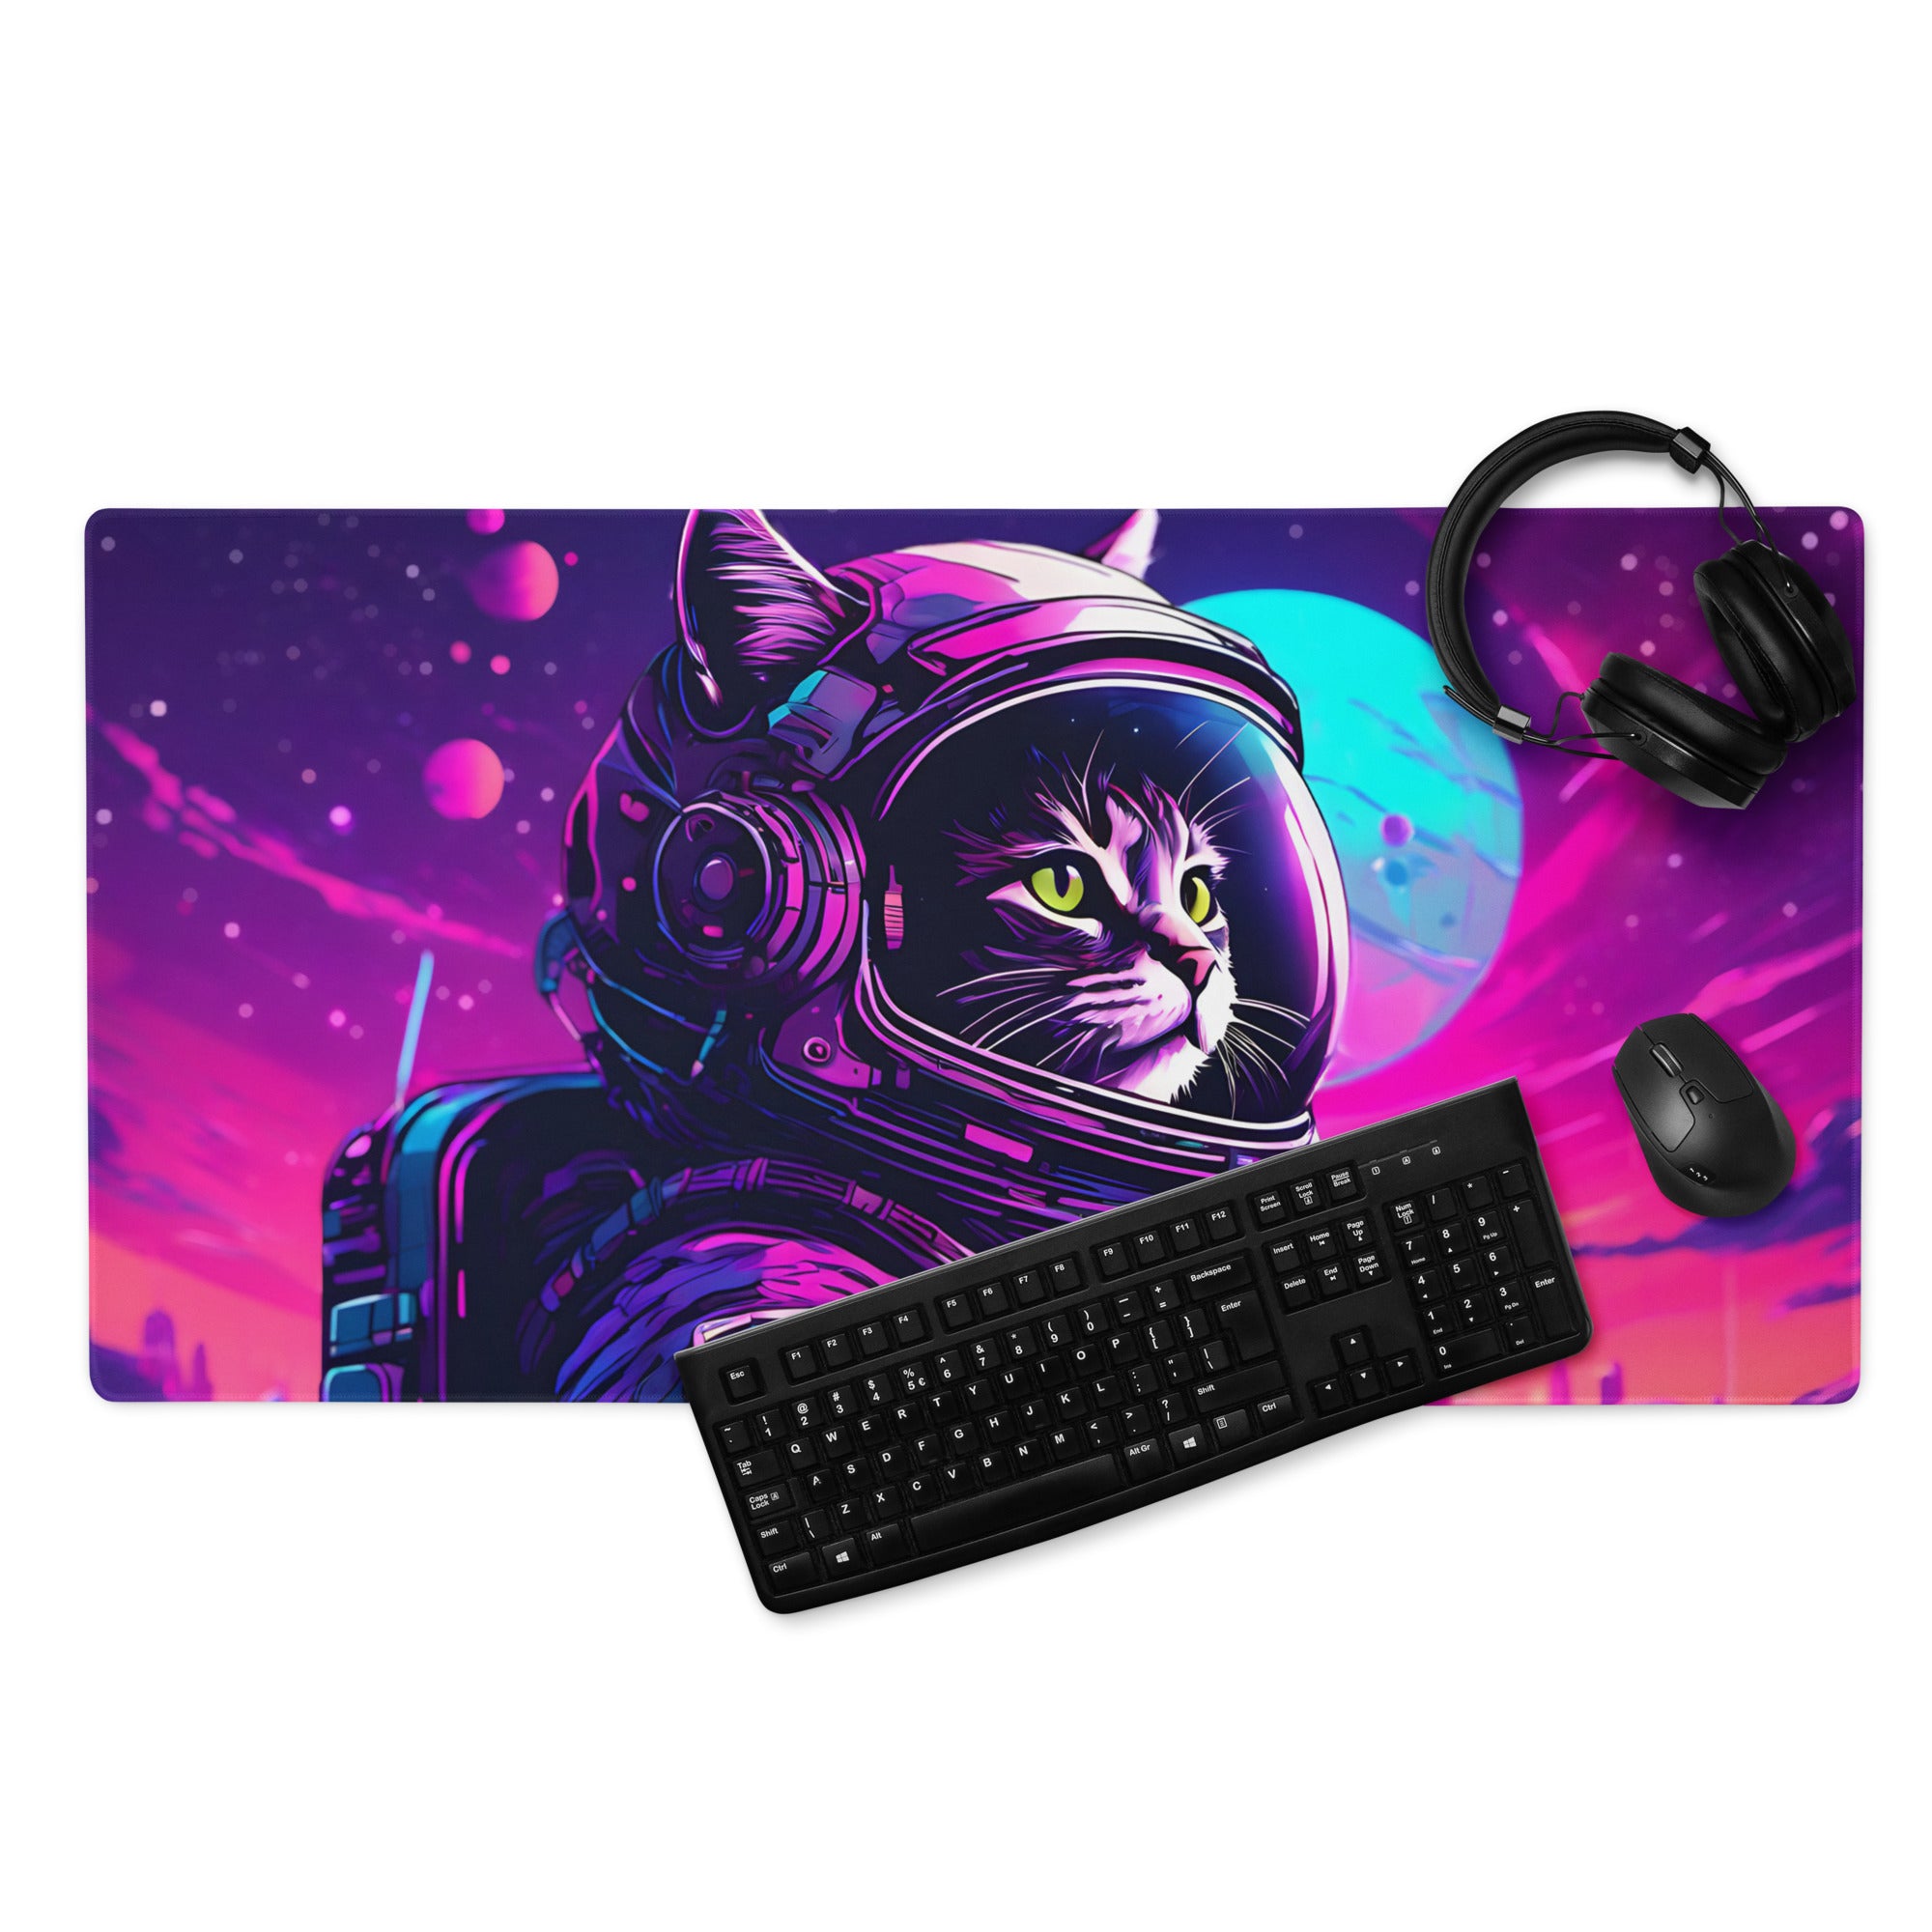 Deskmat | Space Cat Desk Mat SC-2 | Gaming Pad For Laptop Computer |  High Quality Mouse Pad For Keyboard